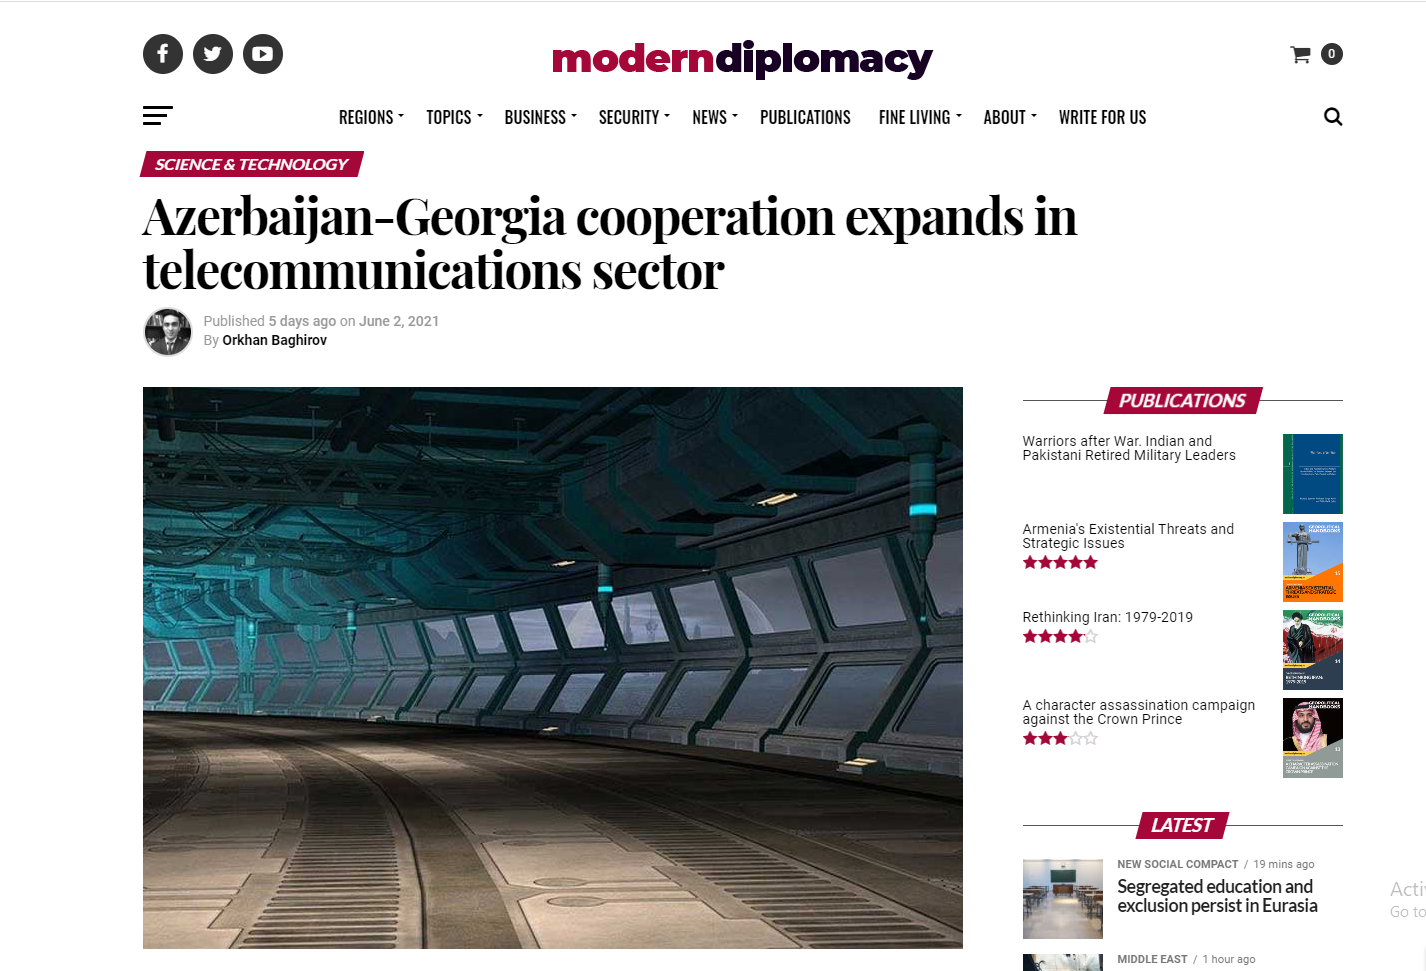 Azerbaijan-Georgia cooperation expands in telecommunications sector